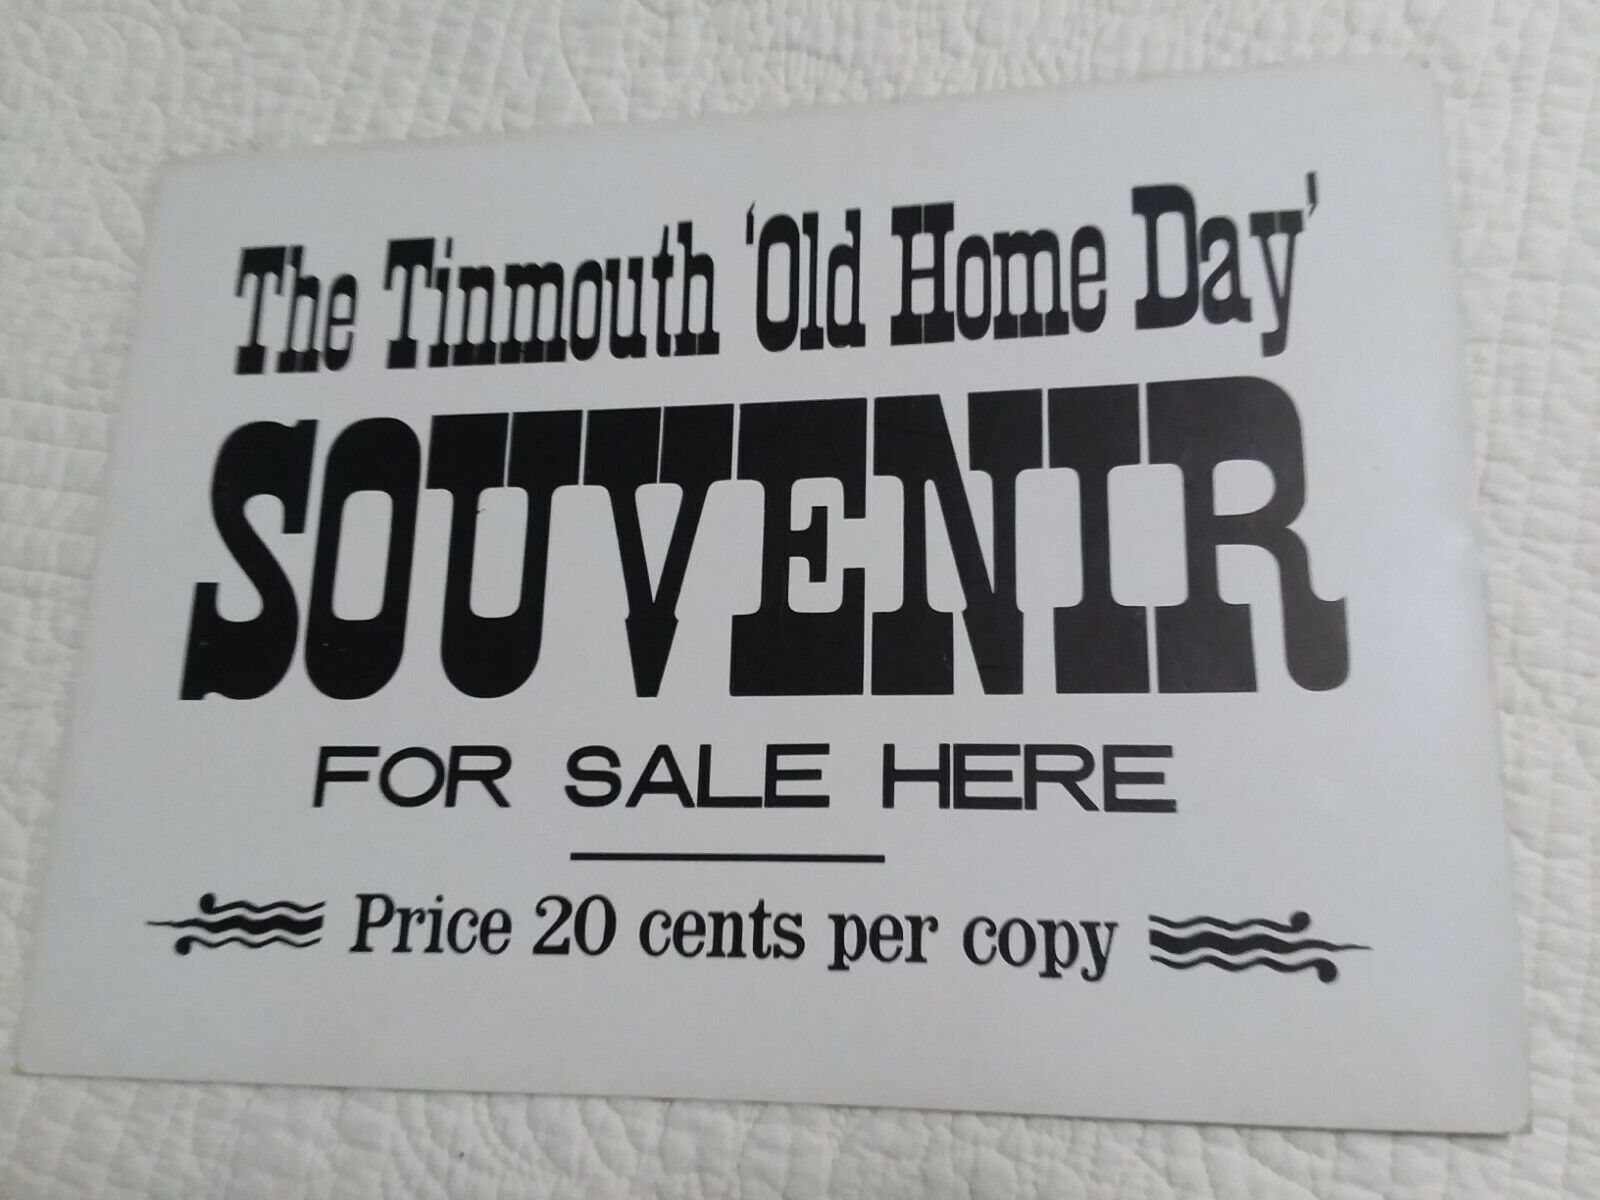 Tinmouth, VT Old Homes Day 1905 Vendor sign